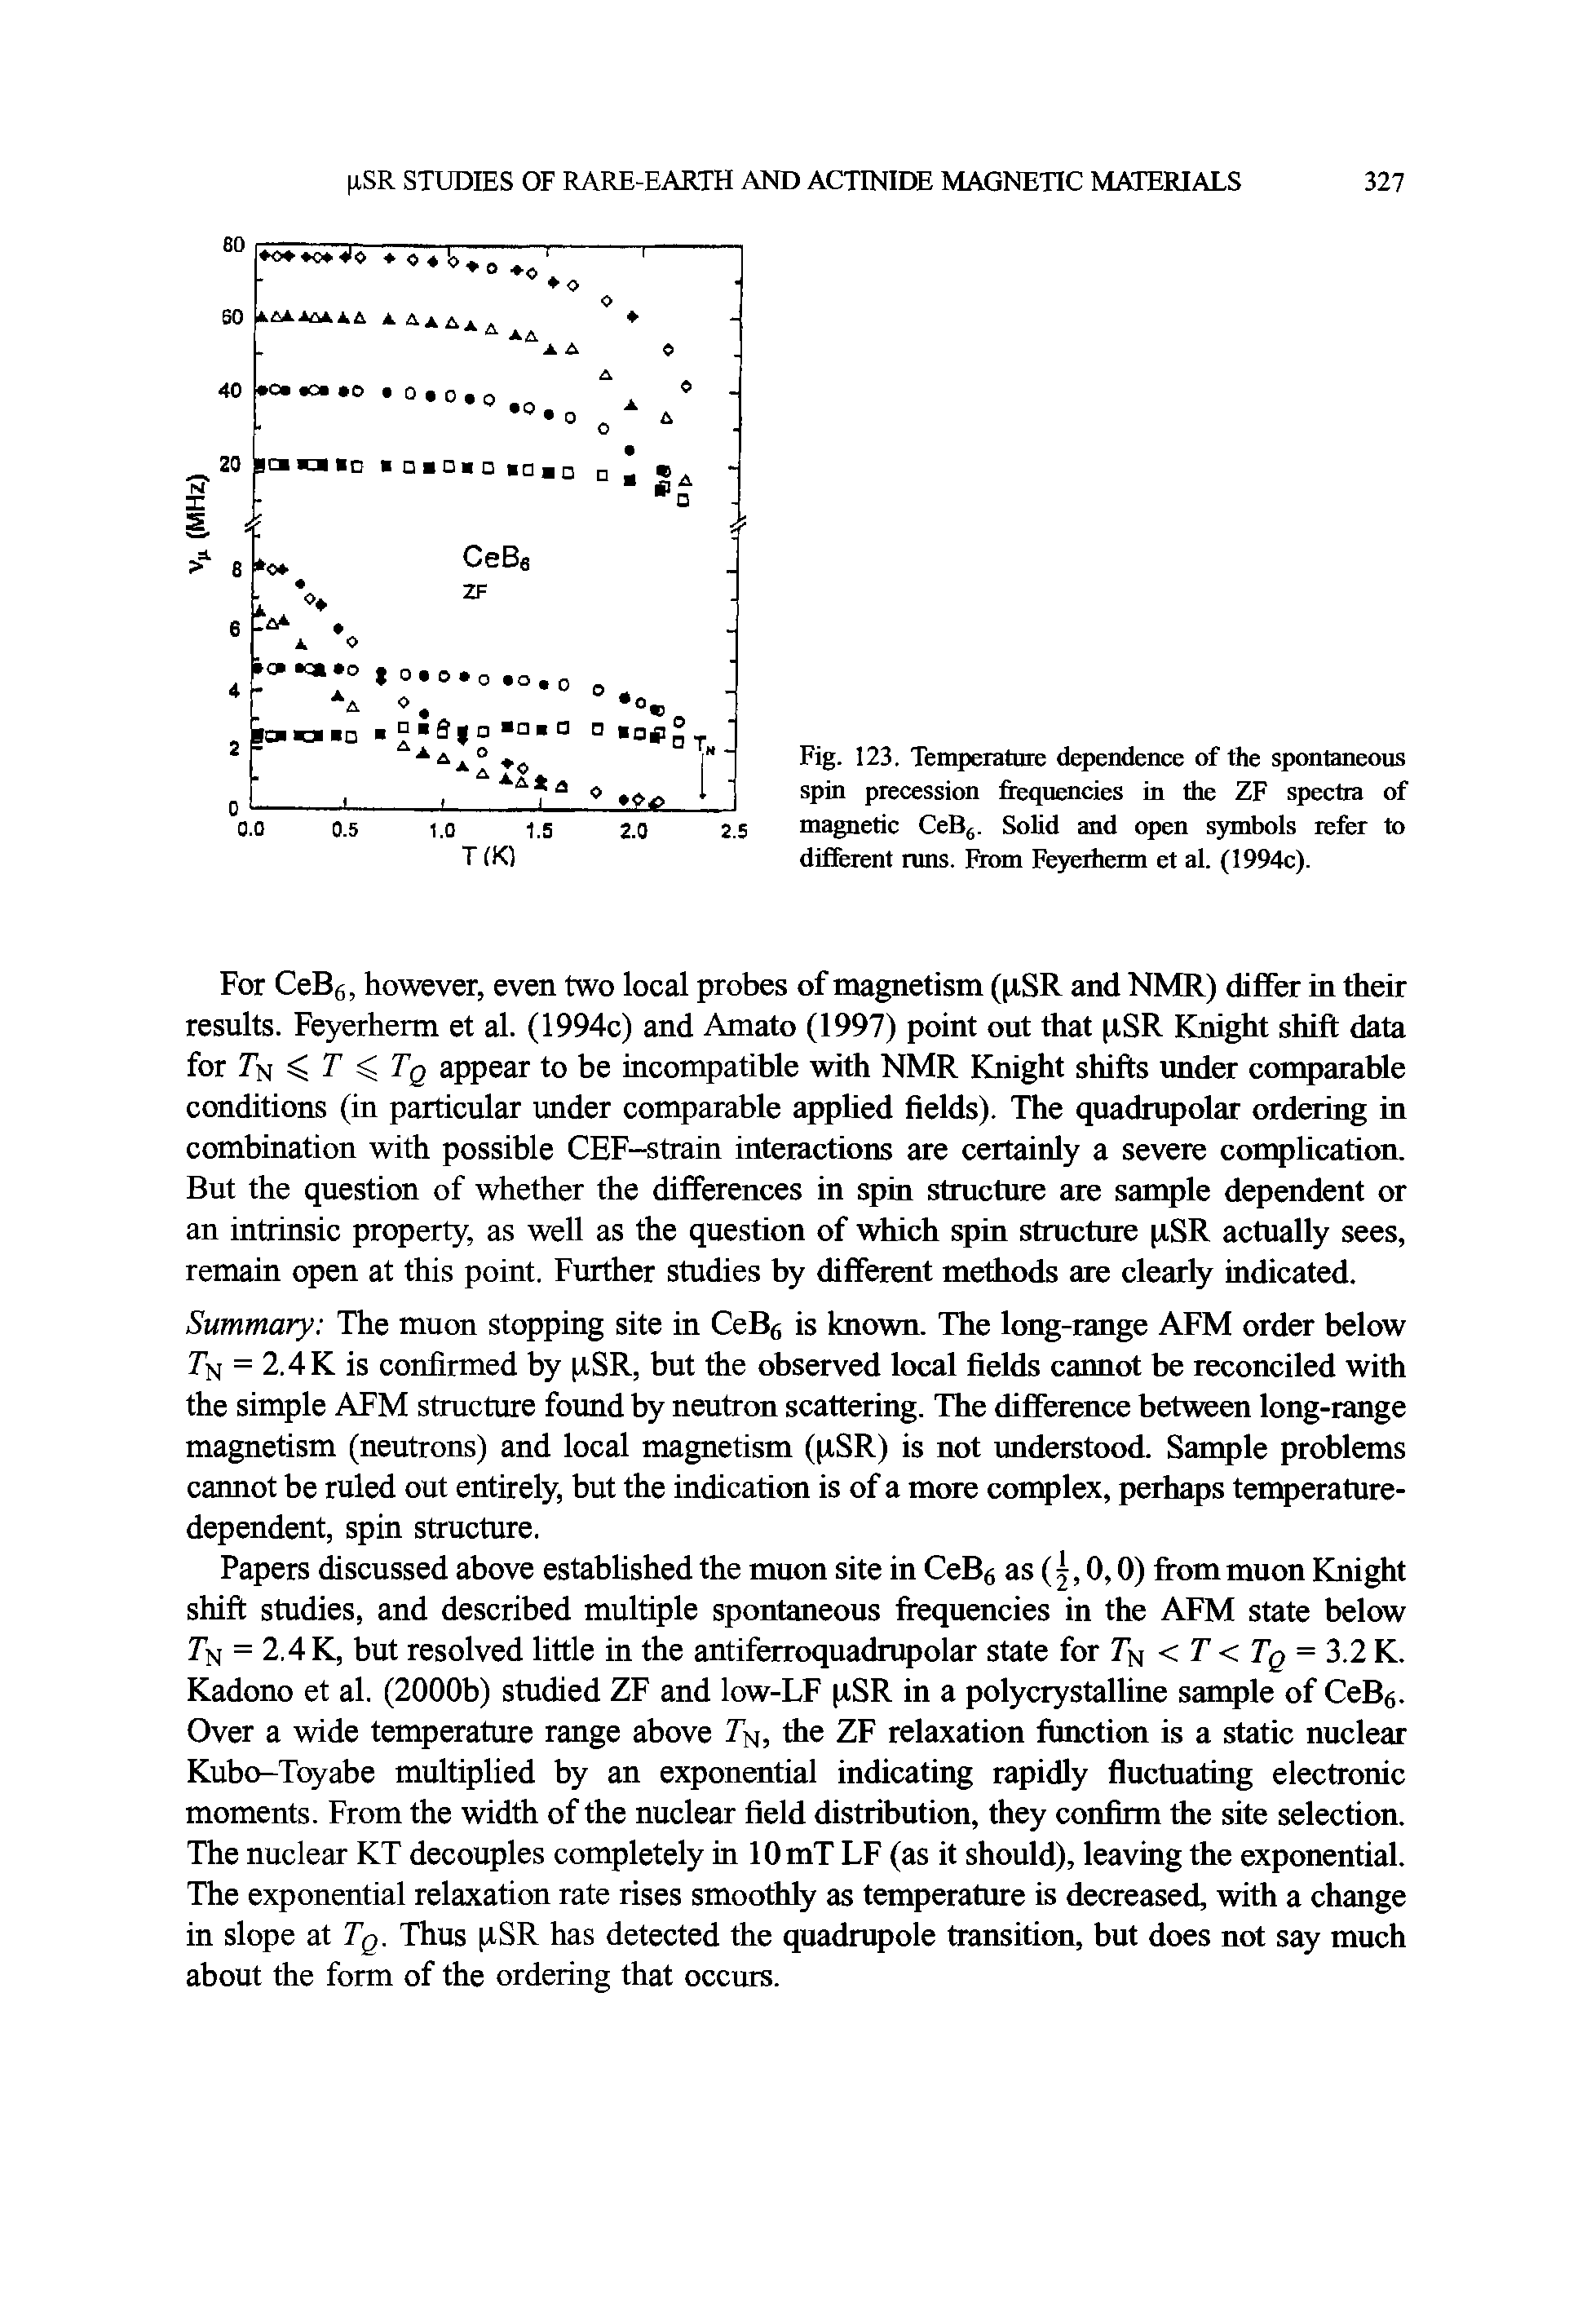 Fig. 123. Temperature dependence of the spontaneous spin precession ftequencies in the ZF spectra of magnetic CeBj. Solid and open symbols refer to different runs. From Feyeriietm et al. (1994c).